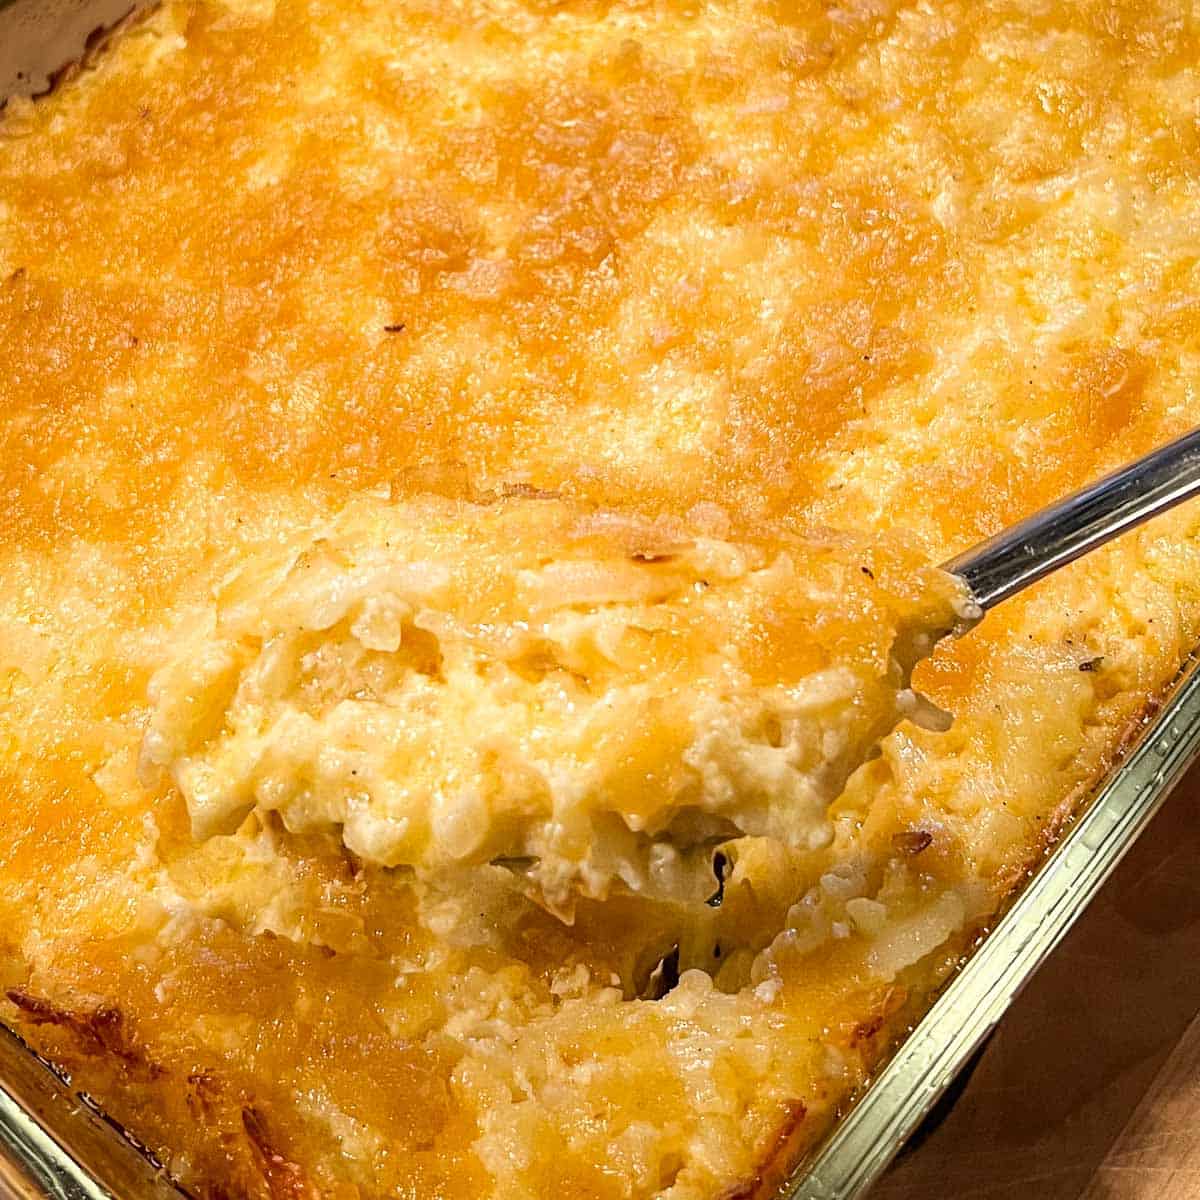 Spoon raised from a pan of Cheesy Hashbrown Casserole.